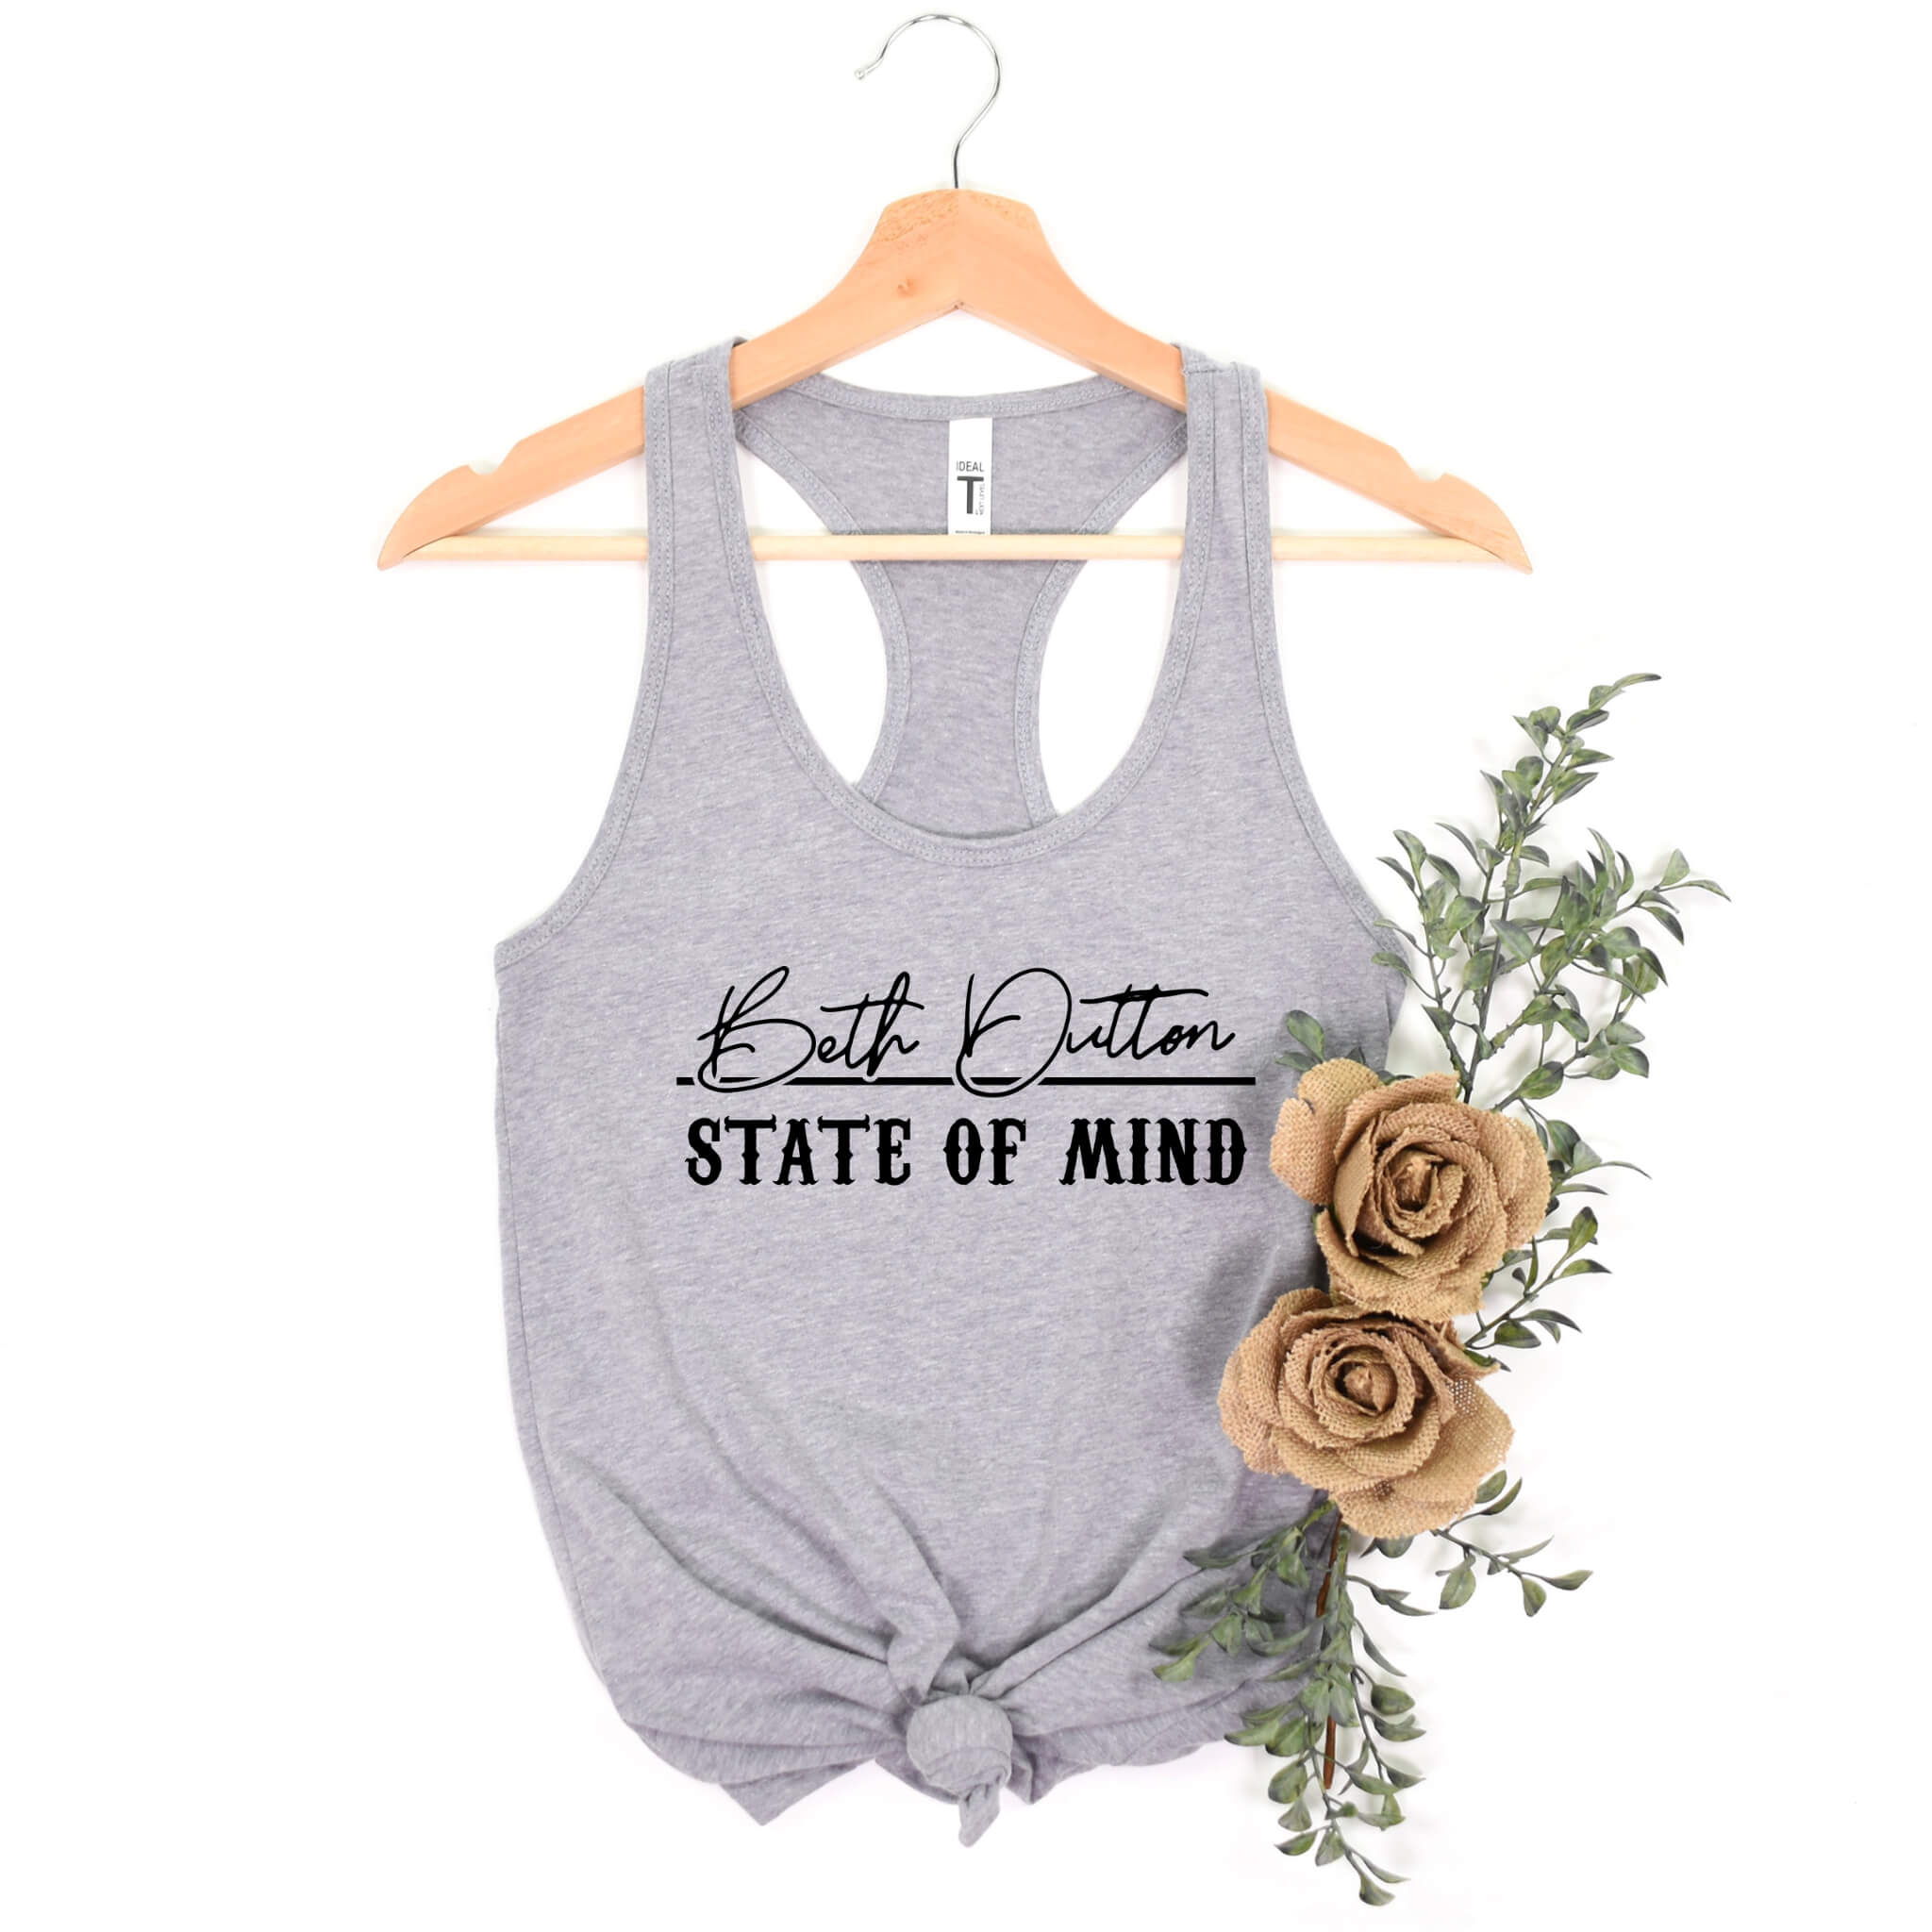 Yellowstone T-Shirt, Beth Dutton State Of Mind, Women’s Tank Top, Ladies T-Shirt, Beth Dutton Quotes, Country Western Tank, Girl’s Rodeo Tank, Custom Apparel, Best Of Beth Dutton T-Shirt